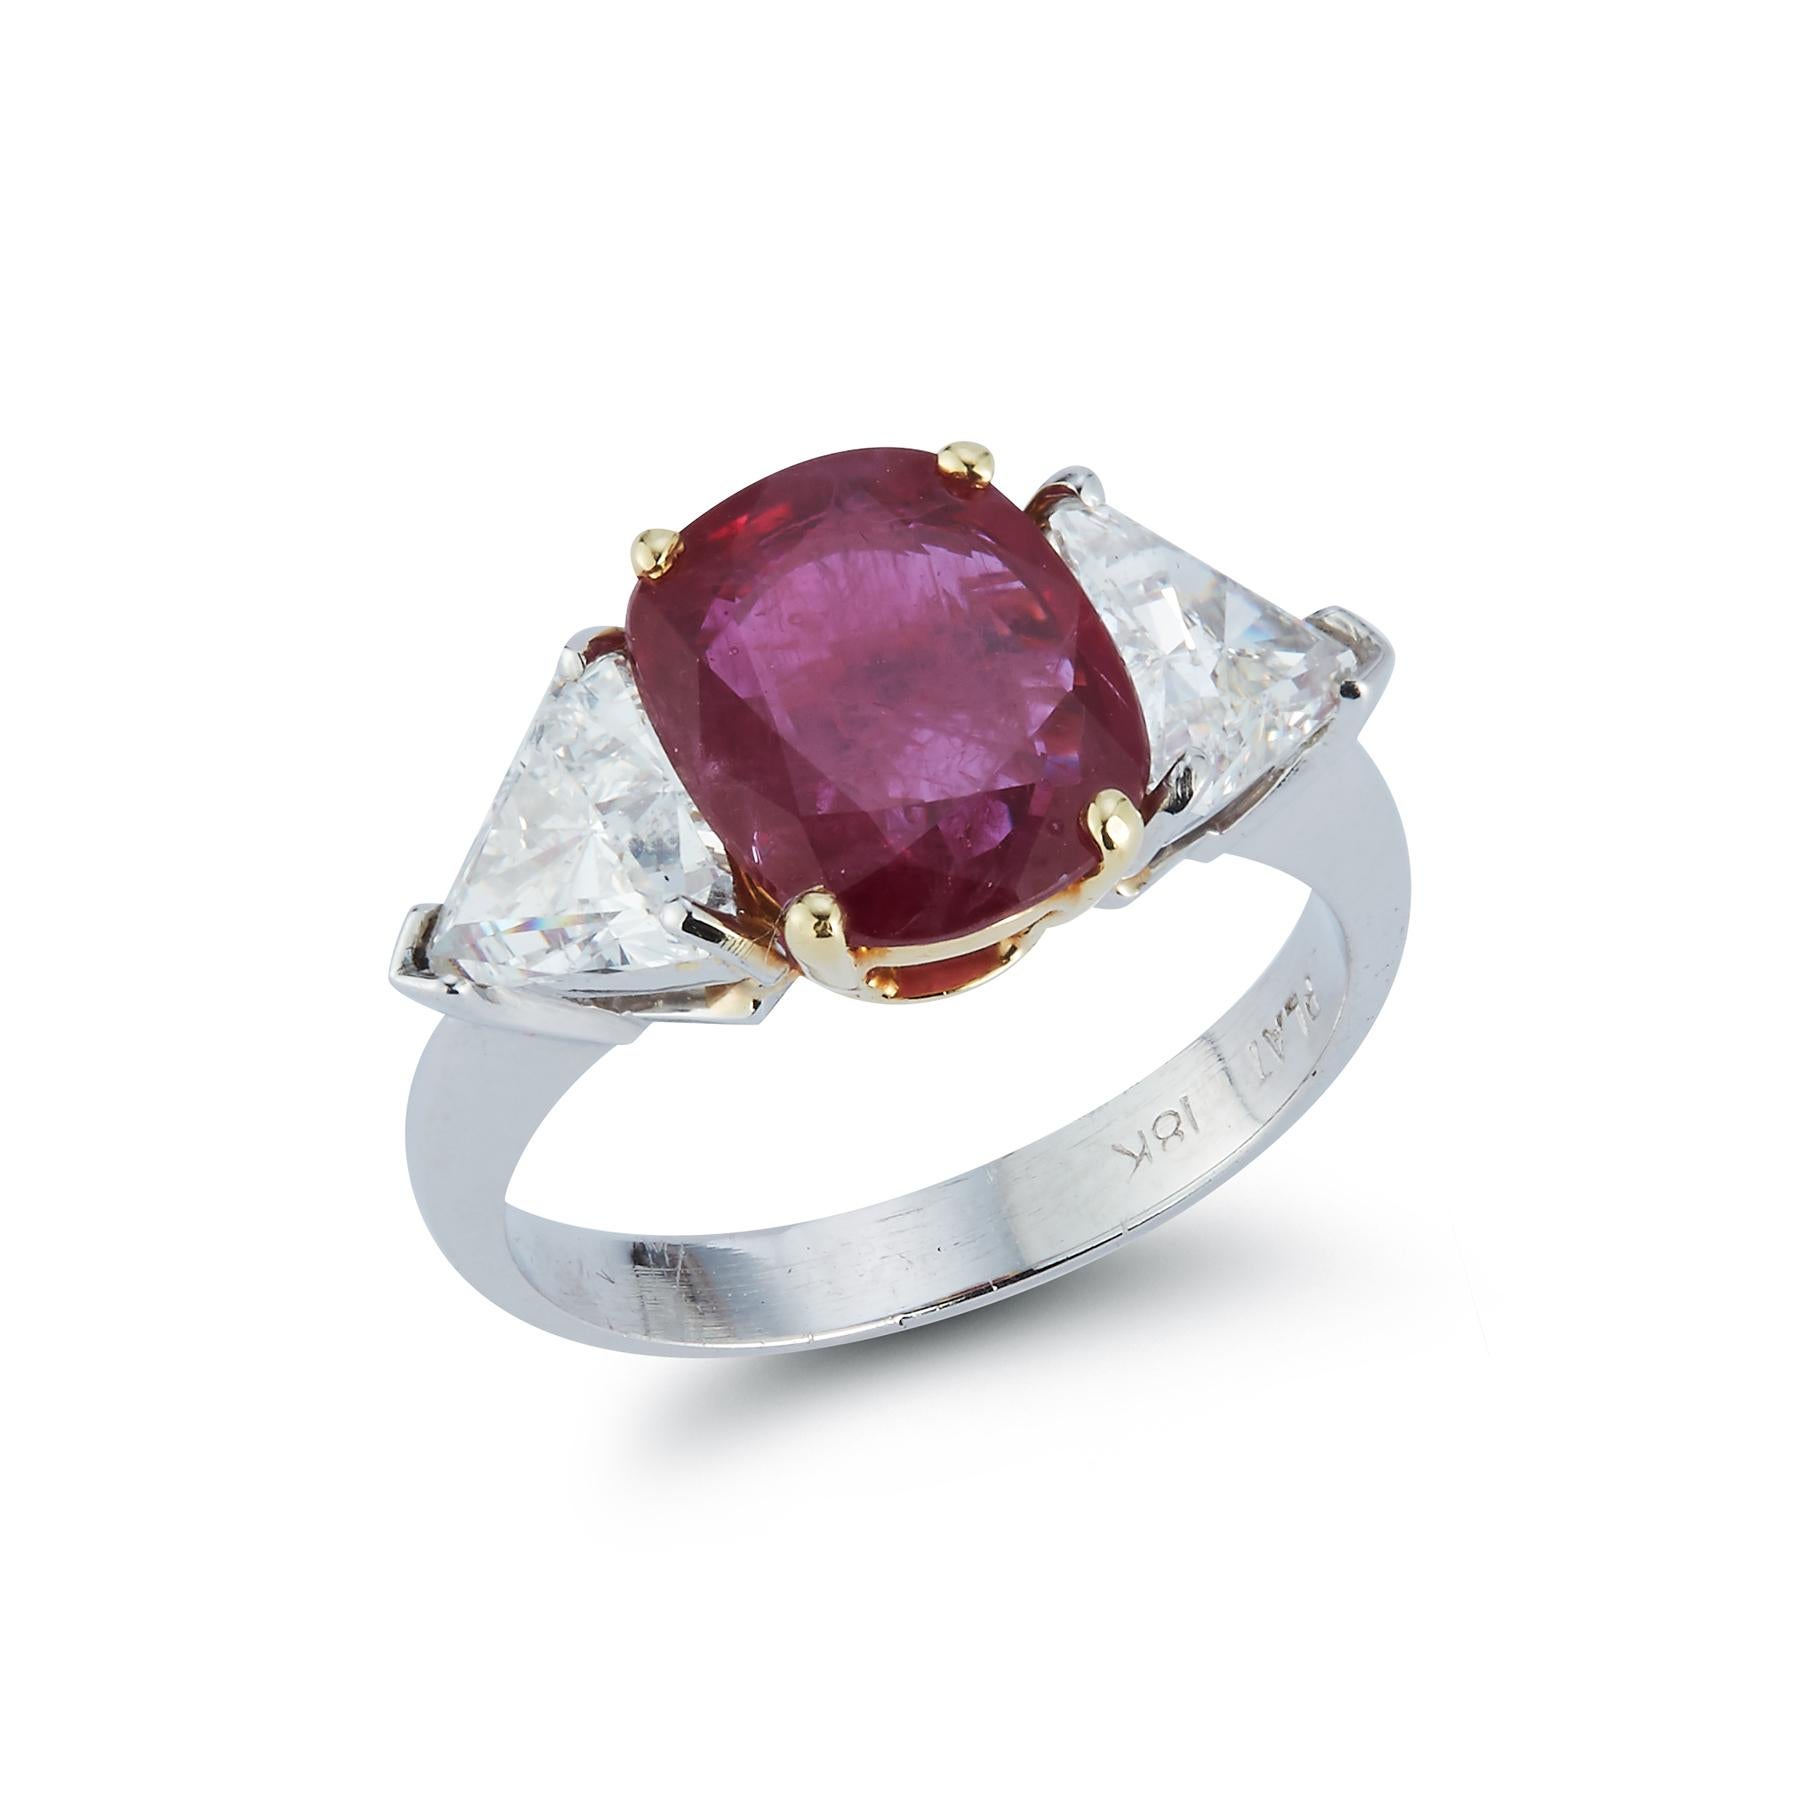 Certified Ruby & Diamond Three Stone Ring Set in Platinum and 18K Yellow Gold
Ruby Weight: 2.51 Cts
Diamond Weight: 1.59 Cts
Ring Size: 5.75 
Re-sizable free of Charge 